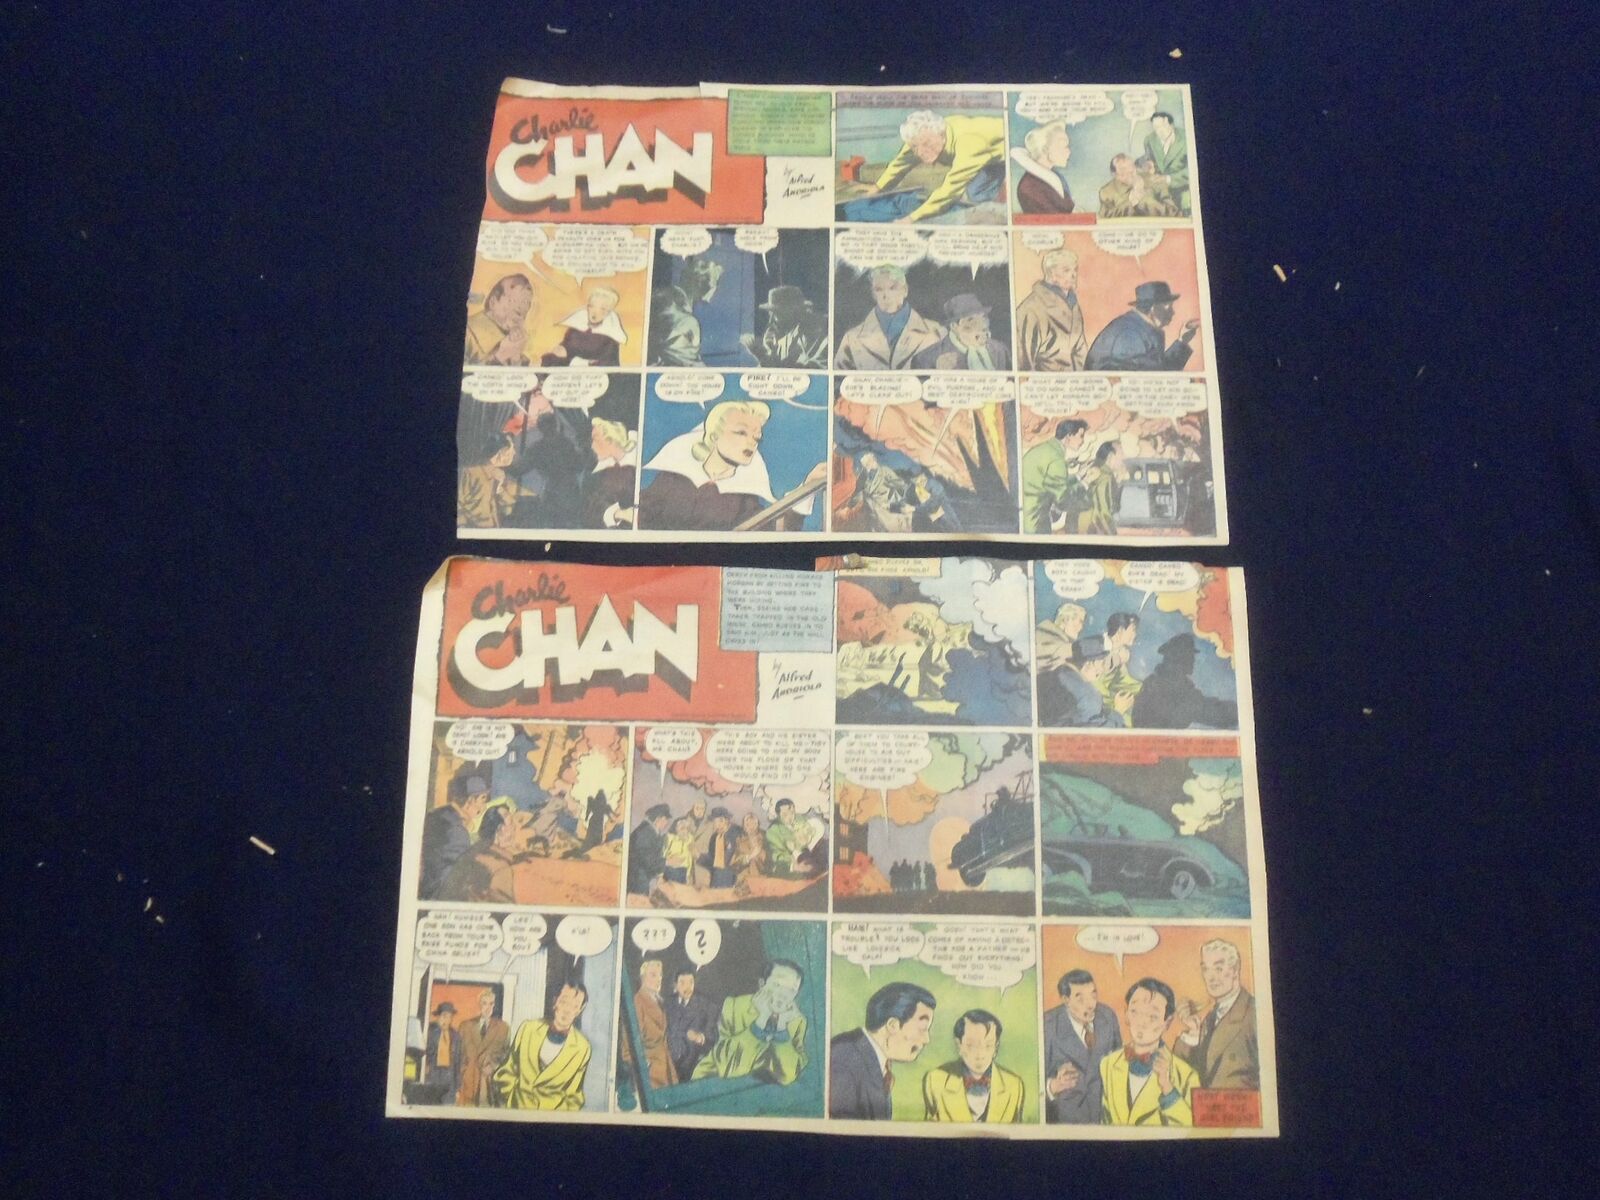 1942 CHARLIE CHAN COLOR COMIC STRIPS - LOT OF 2 - NP 5221